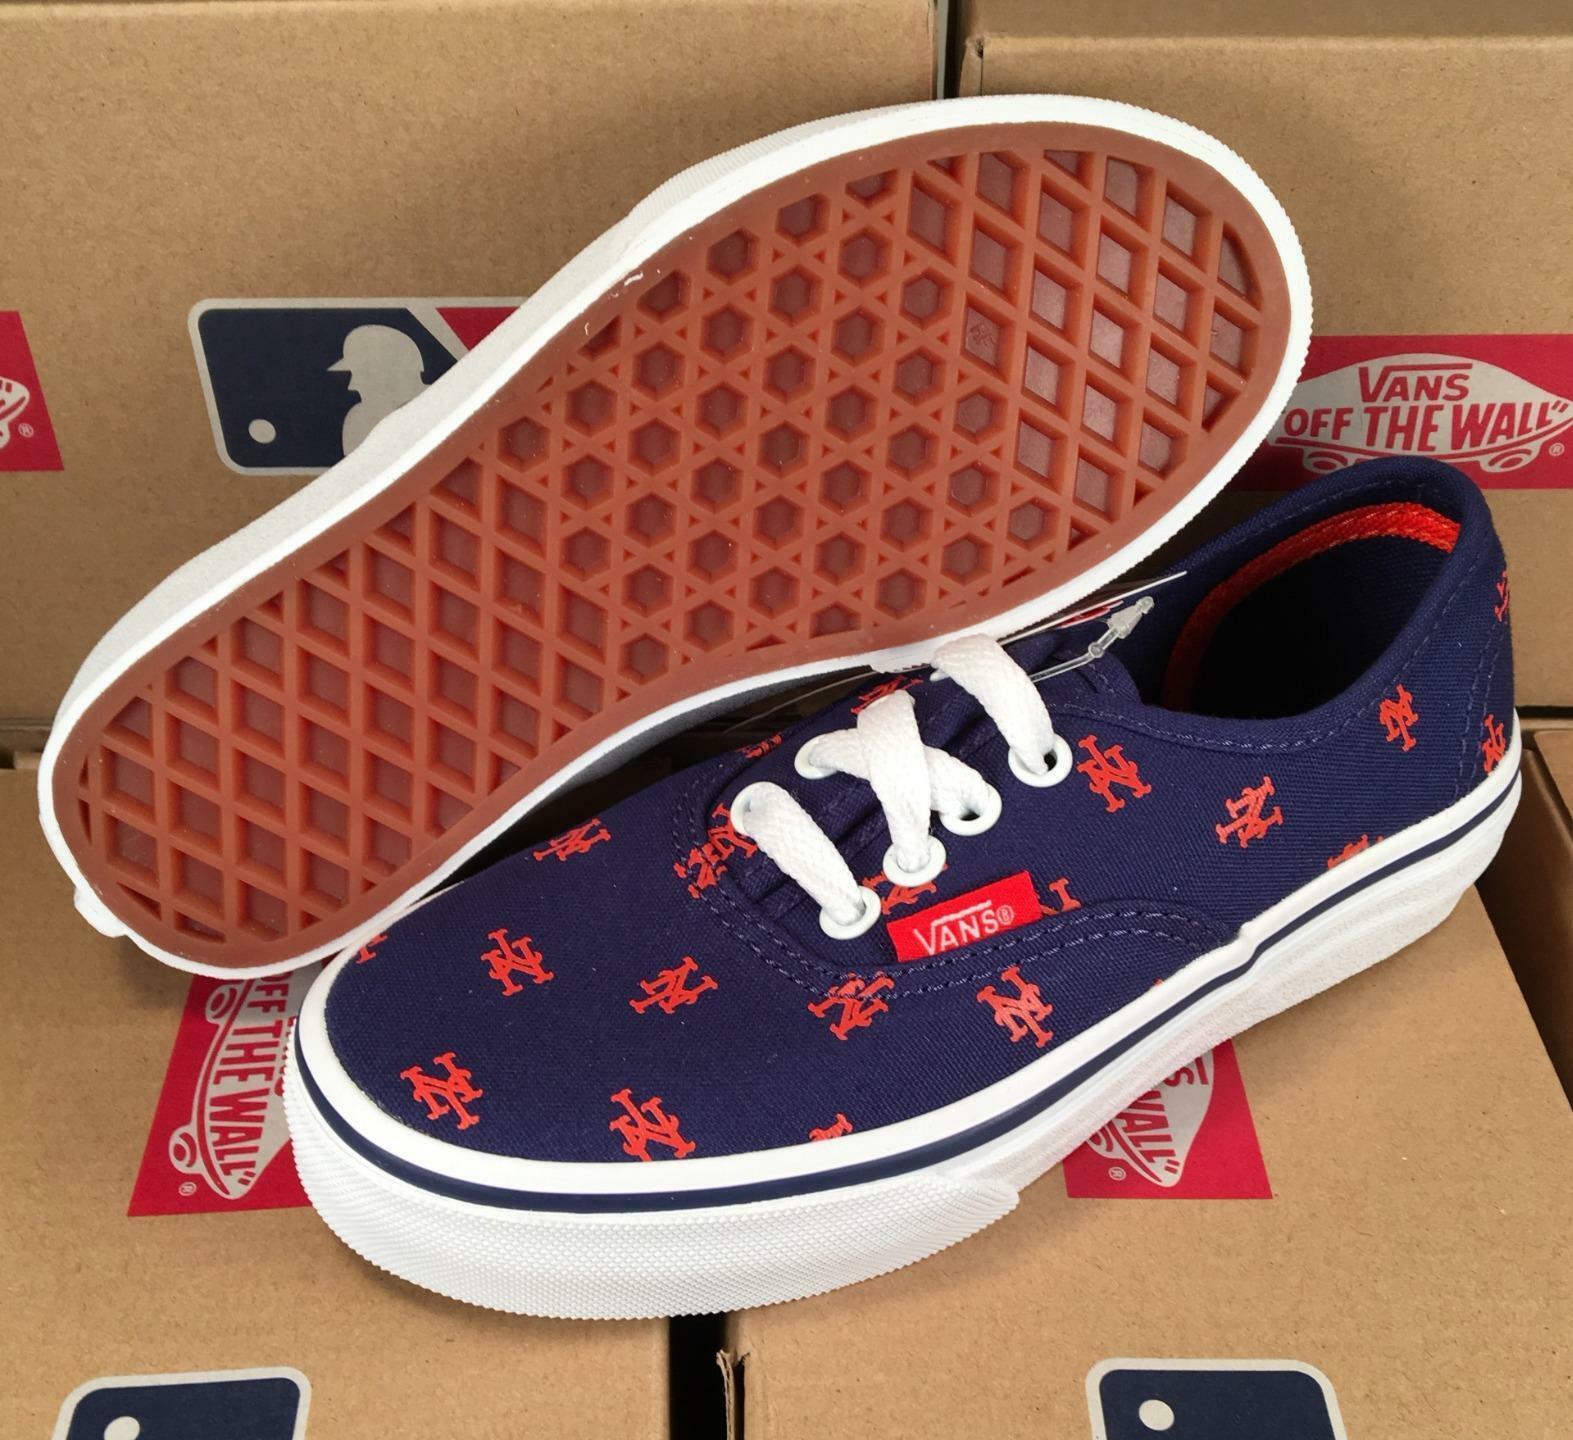 Vans KIDS New York Mets MLB Authentic Sneaker Limited Edition Shoes ...